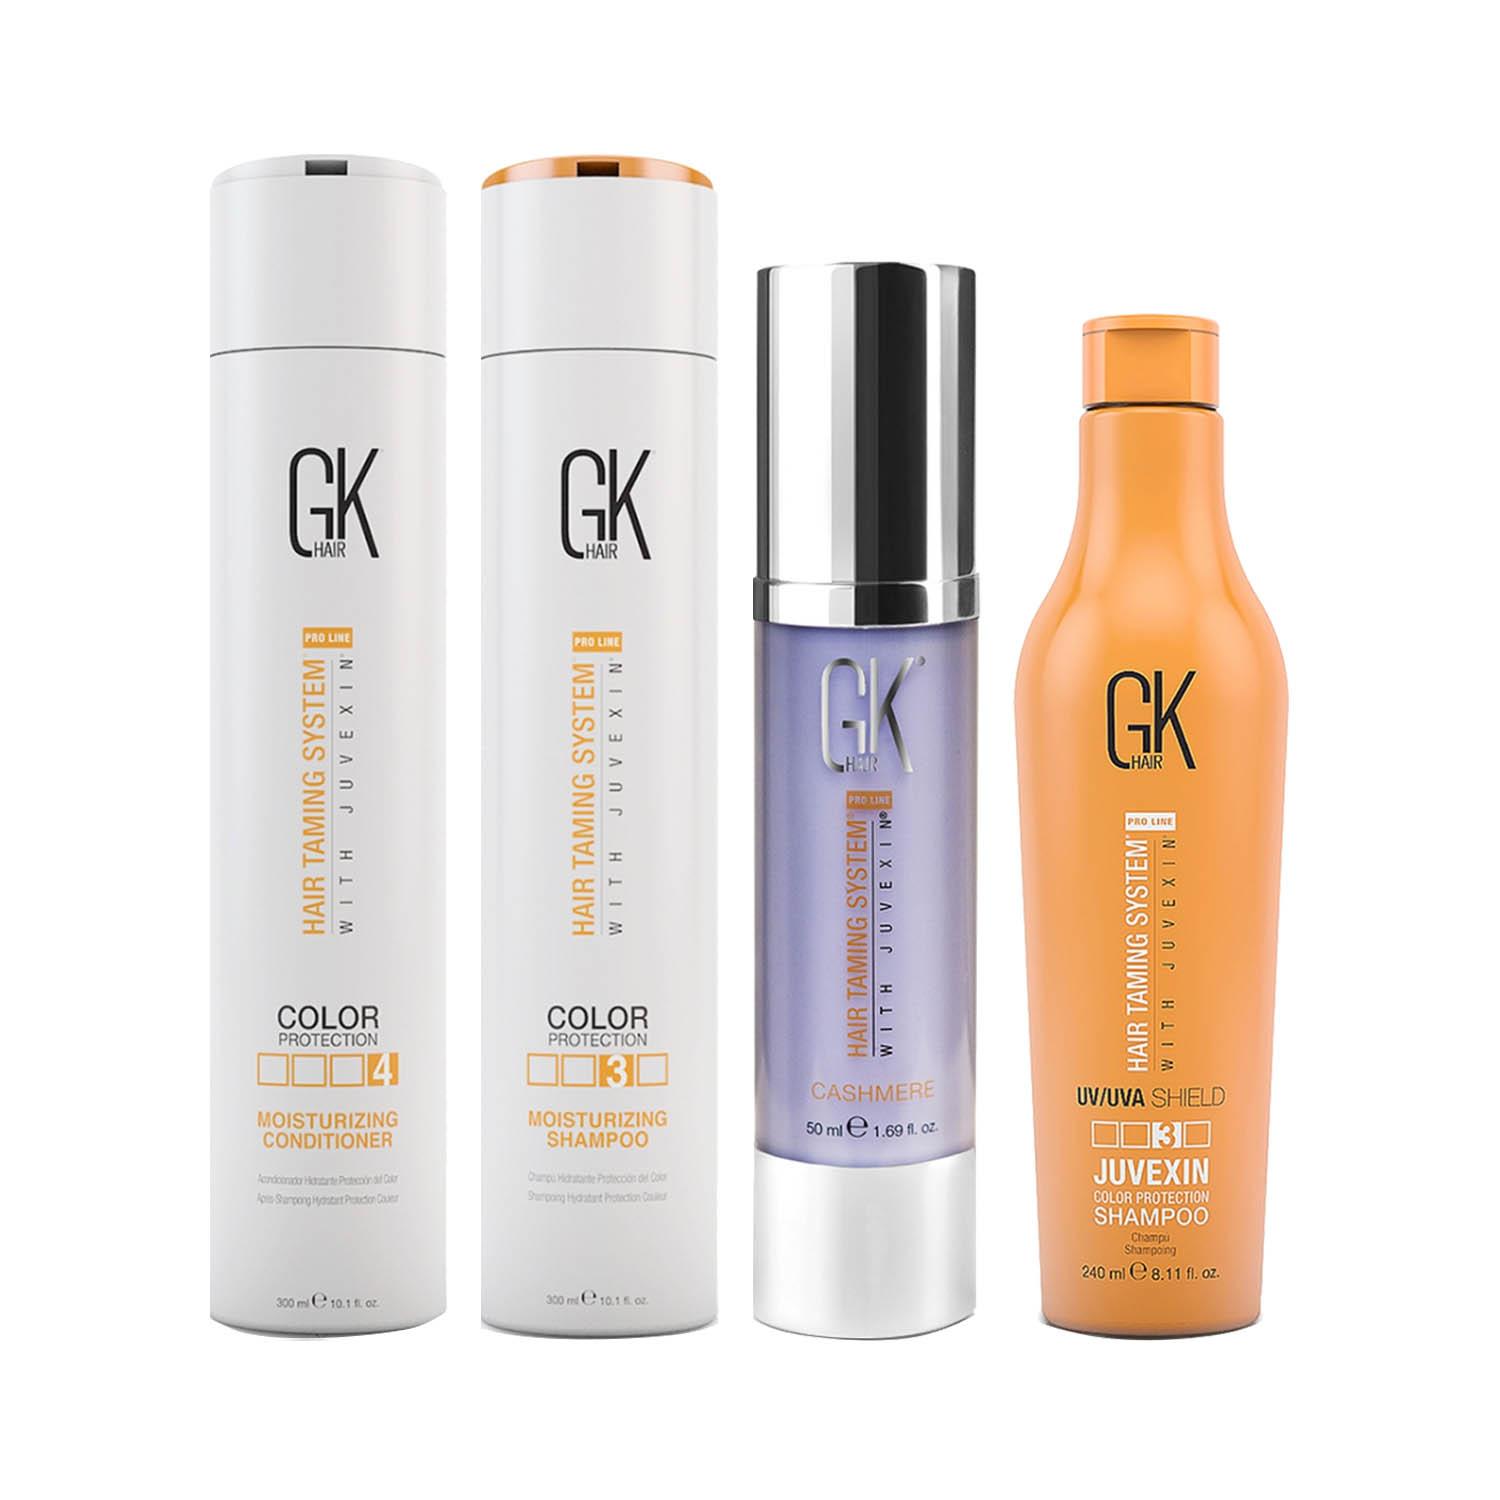 GK Hair | GK Hair Moisturizing Shampoo and Conditioner 300ml with Cashmere 50ml and Color Shield Shampoo 240ml